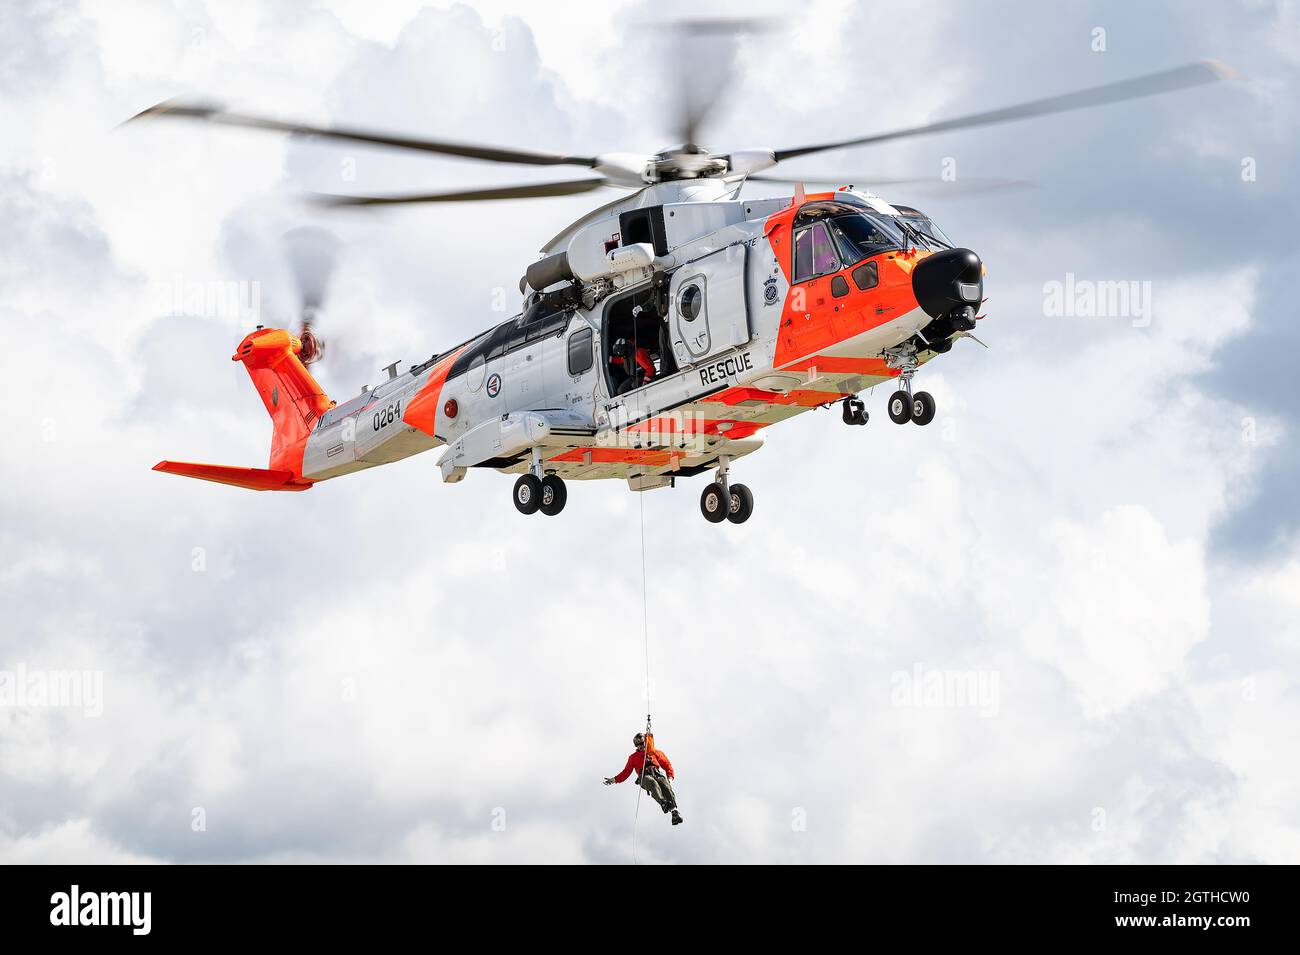 An AgustaWestland AW101 search and rescue helicopter from the Redningshelikoptertjenesten of the Royal Norwegian Air Force. Stock Photo